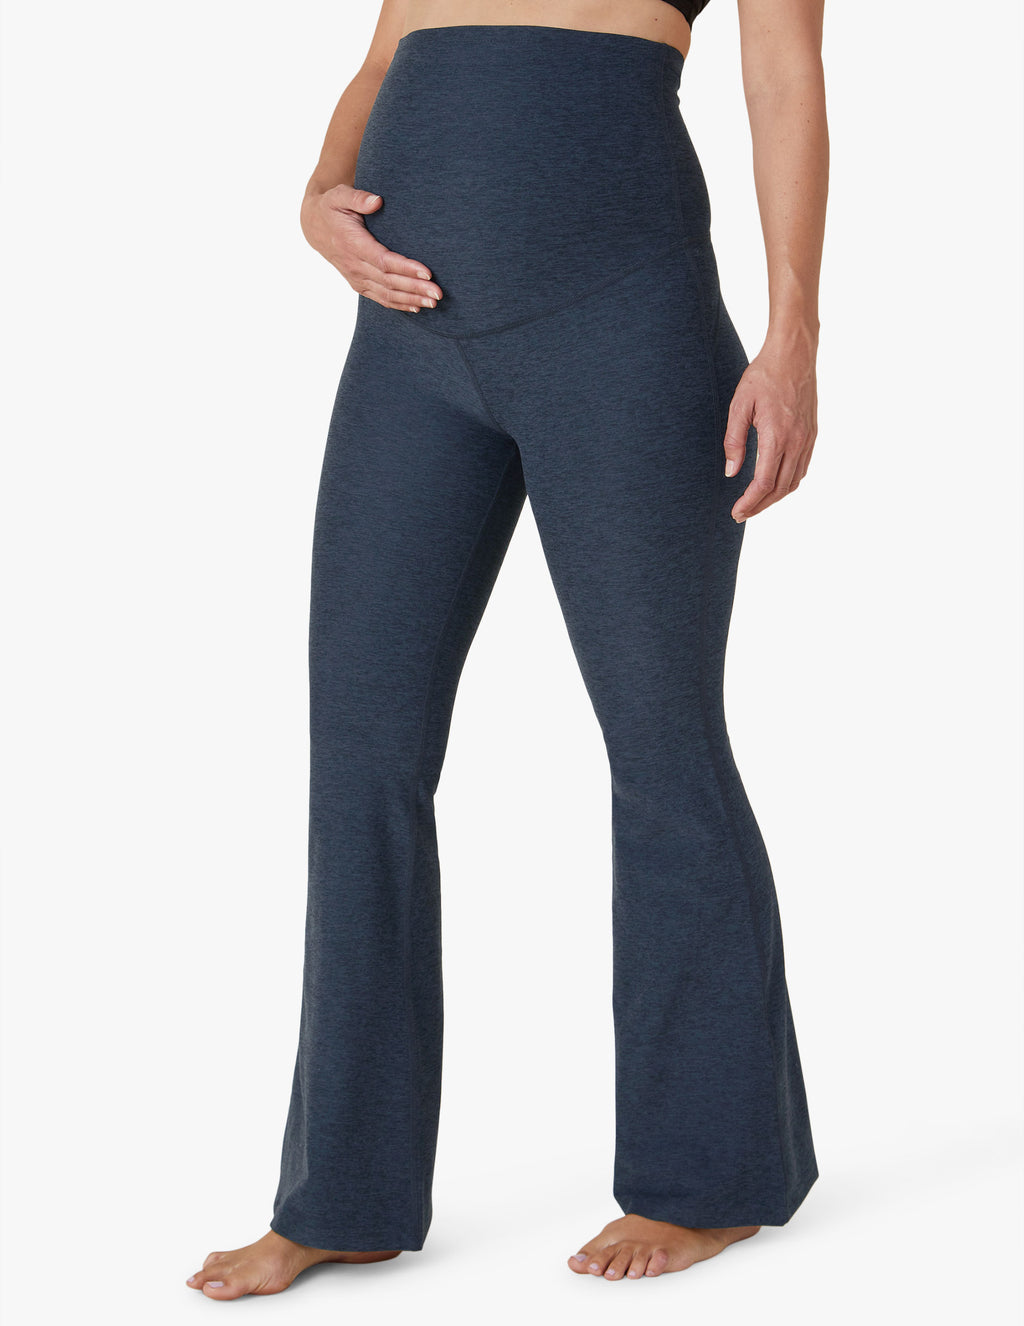 Spacedye All Day Flare Maternity Pant Featured Image